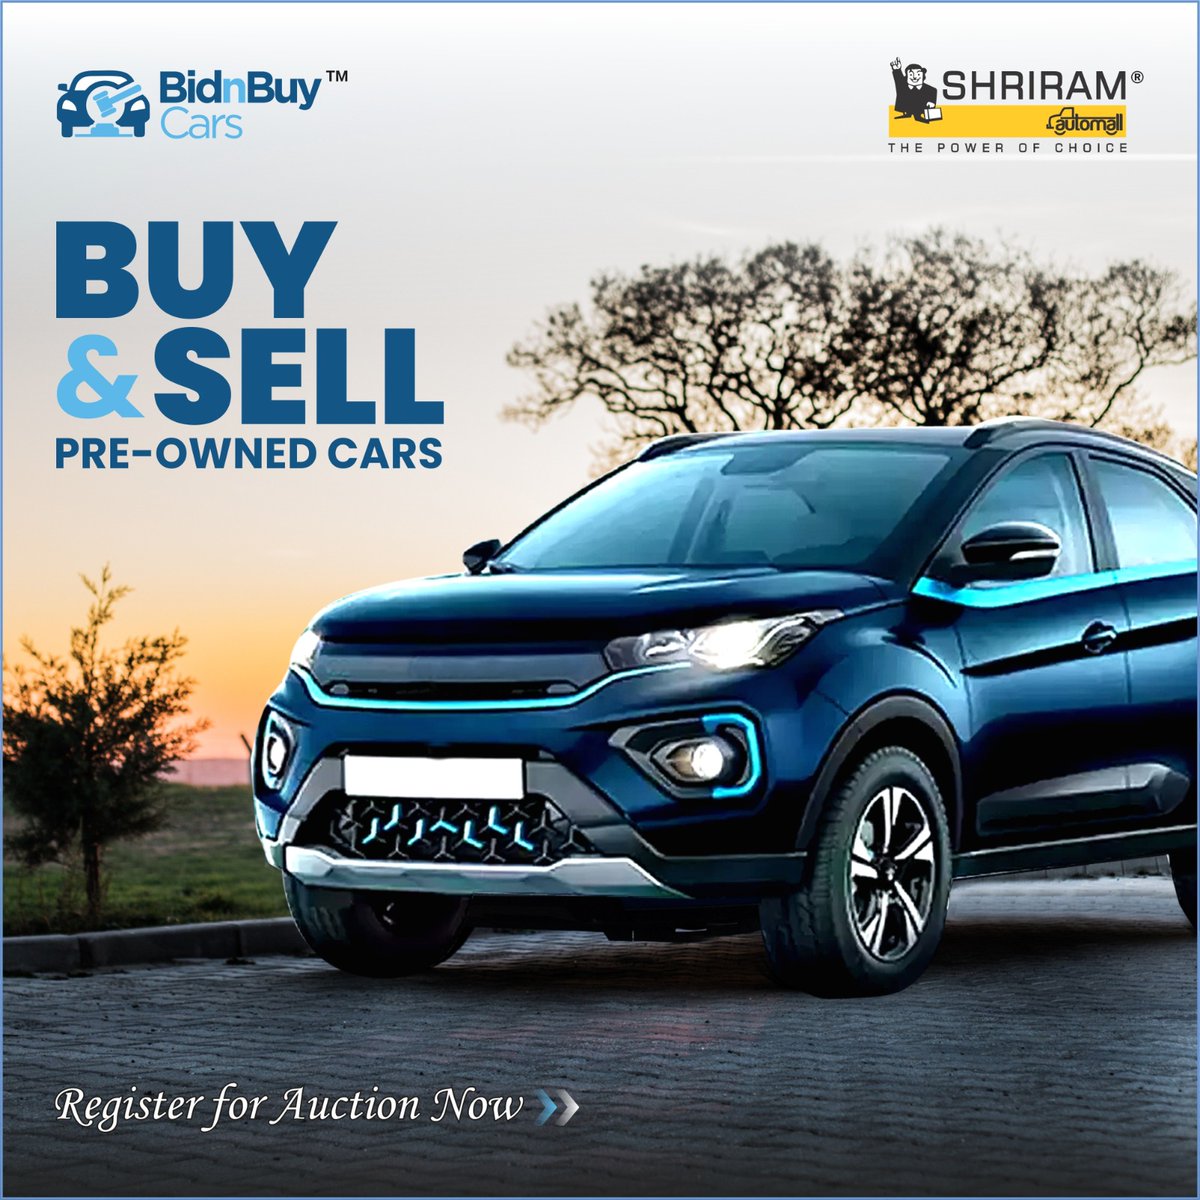 Buy the Used Car of Your Choice.

Registered Now: l.samil.in/46P9Osps

#UsedVehicles #UsedEquipment #PhysicalAuction #UsedCars #Cars #Sell #BuyNow #Samil #ShriramAutomall #ProudSamilian